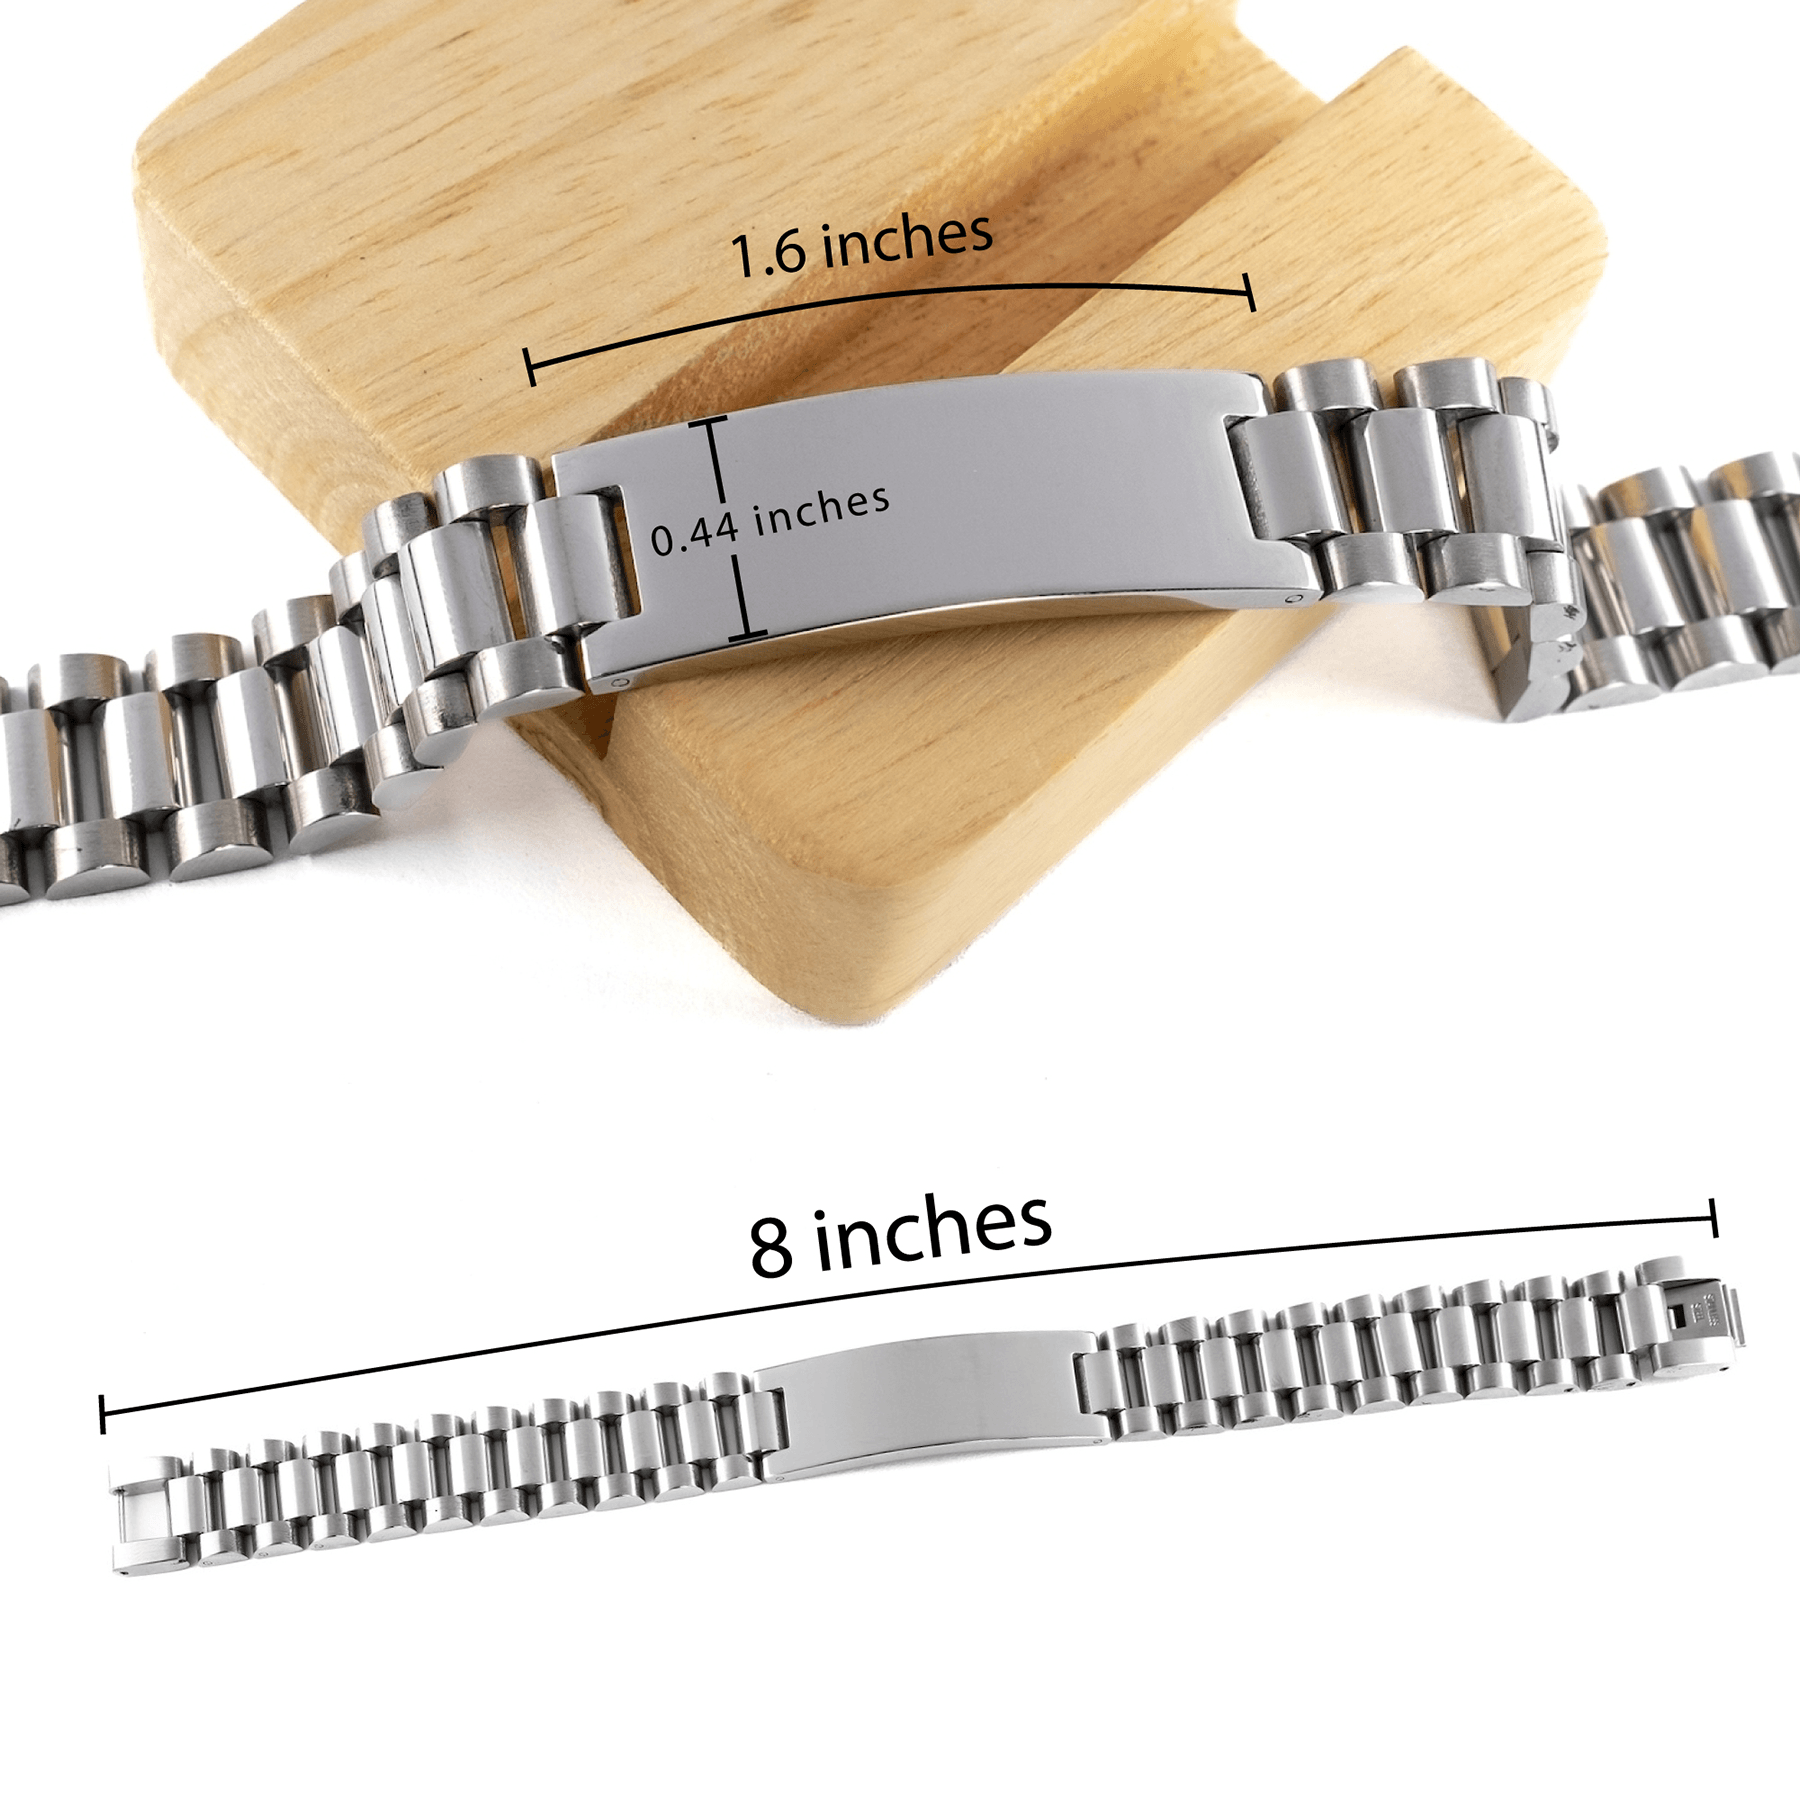 Remarkable Bookbinder Gifts, Your dedication and hard work, Inspirational Birthday Christmas Unique Ladder Stainless Steel Bracelet For Bookbinder, Coworkers, Men, Women, Friends - Mallard Moon Gift Shop